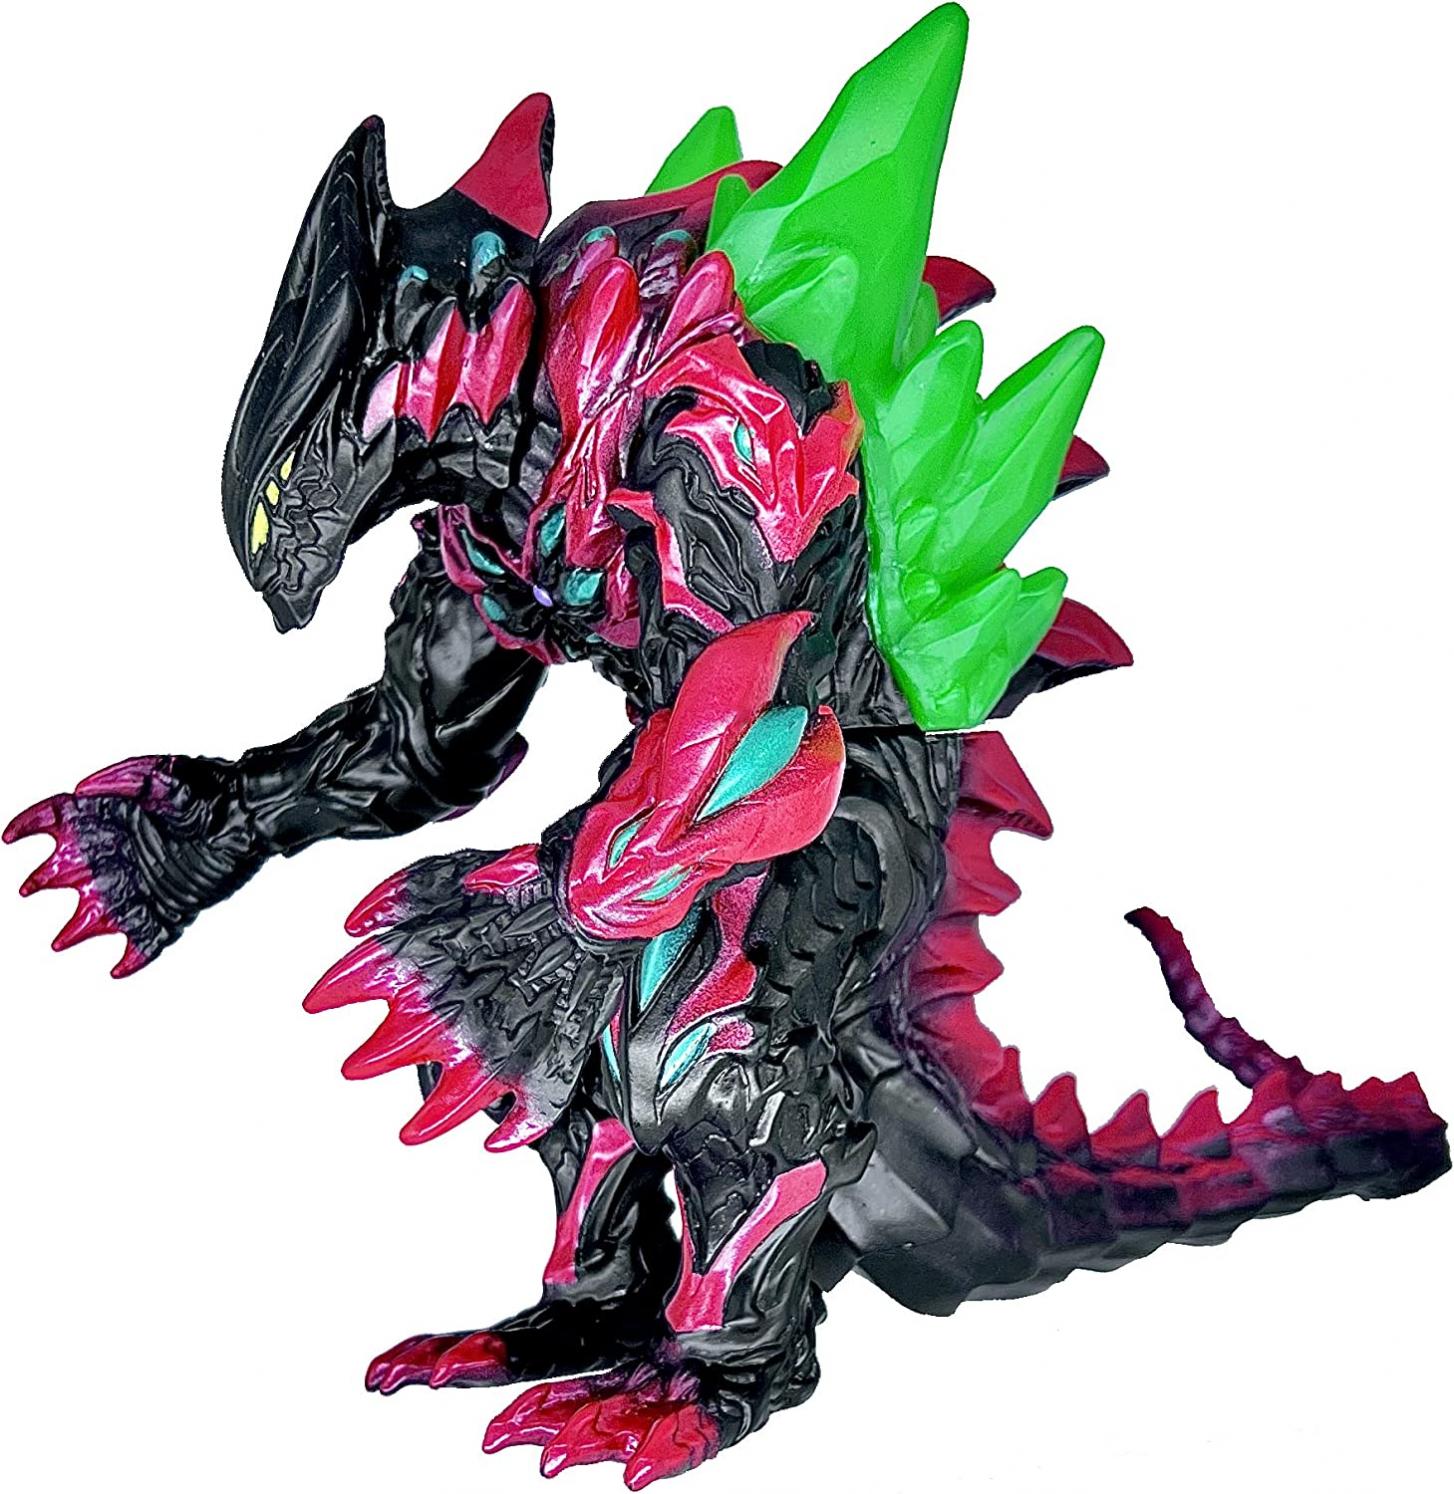 TwCare Ultra Monster EX Arch Belial Action Figure vs Godzilla Toy, 7.9in Tall, 13in Length, Movie Series Movable Joints Soft Vinyl, Travel Bag